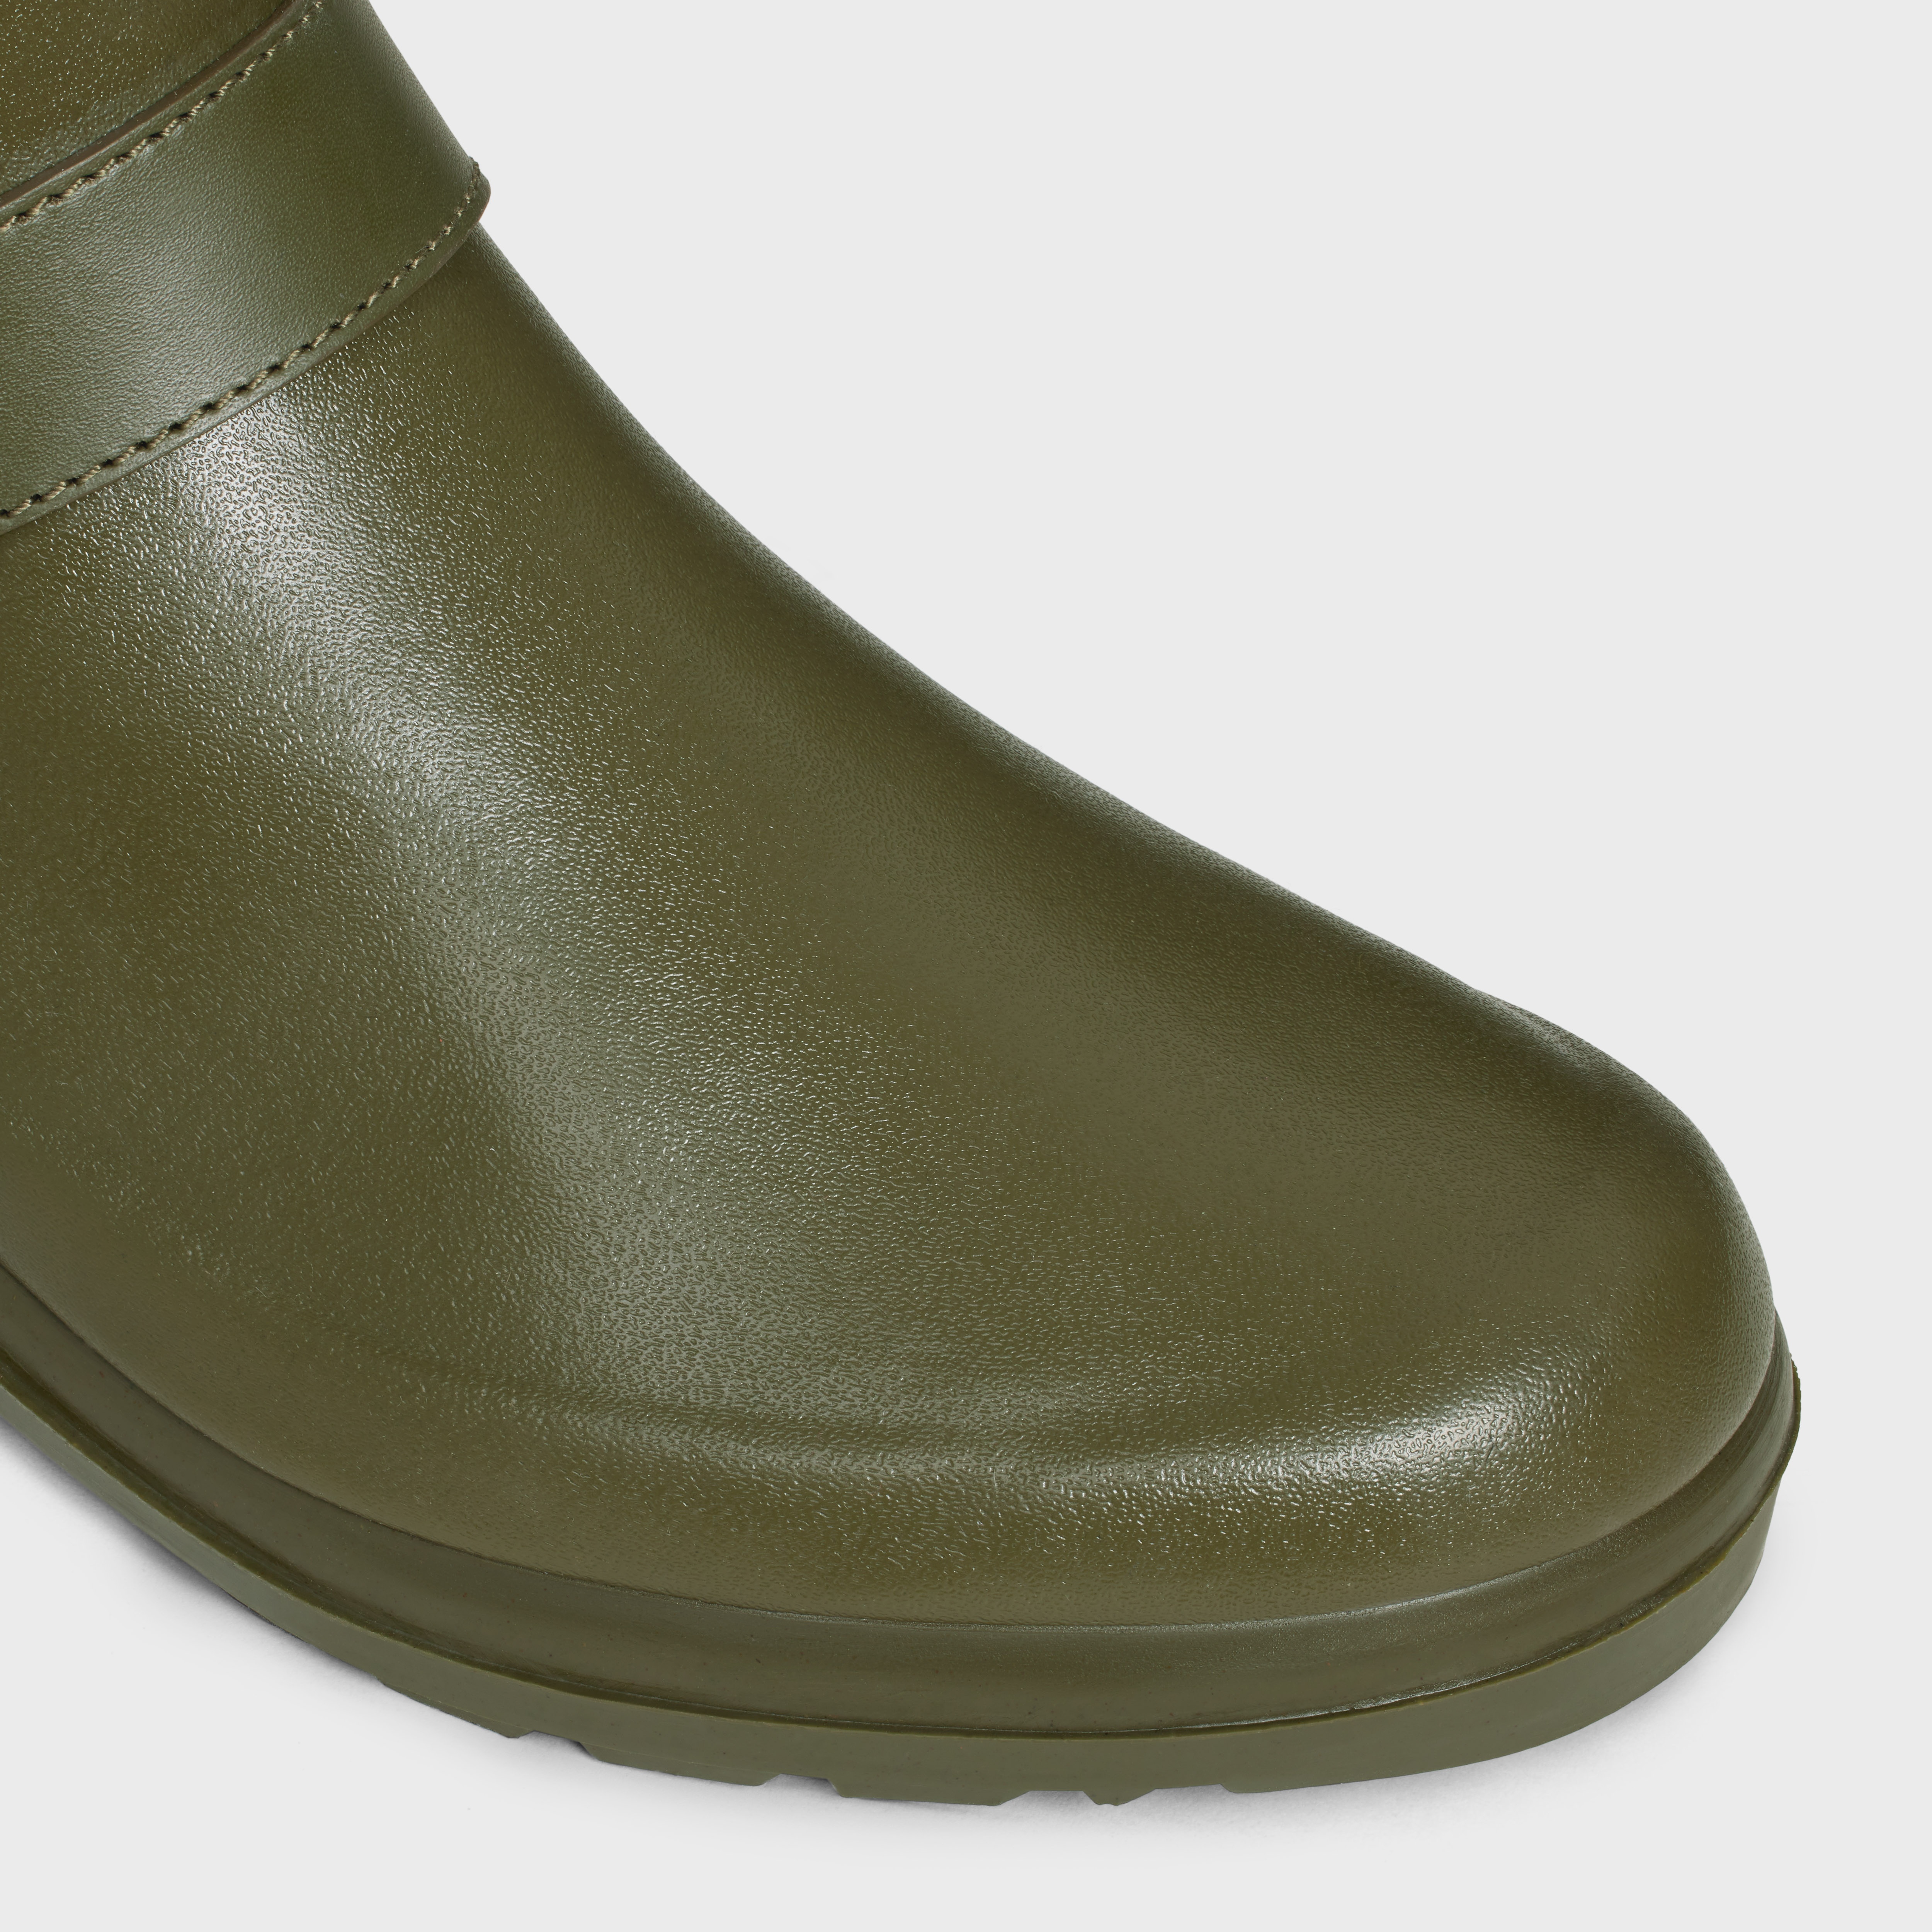 HIGH CELINE RAIN BOOTS in RUBBER AND CALFSKIN - 4